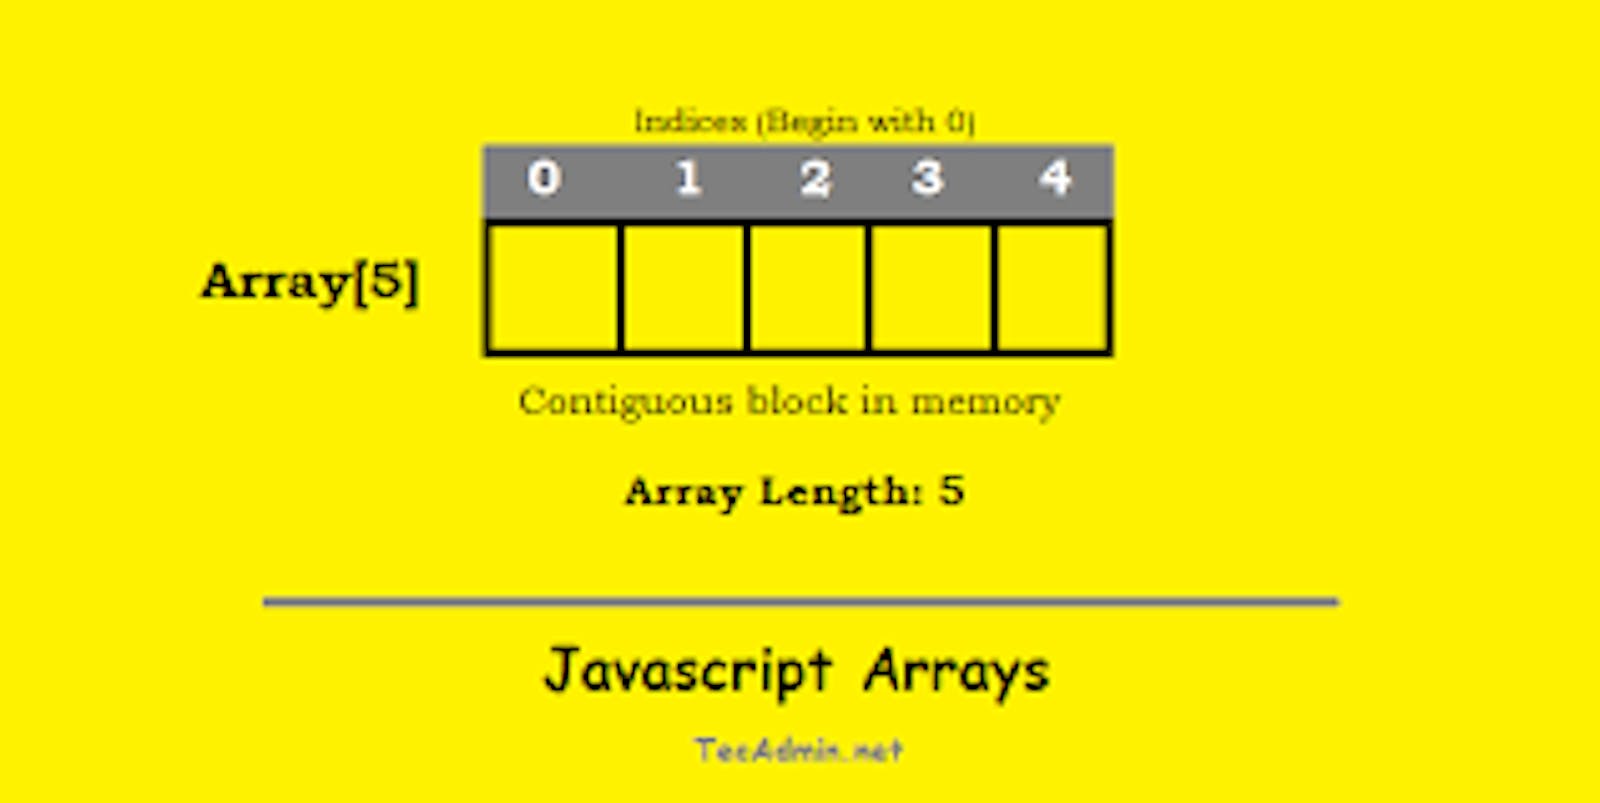 Average of an array